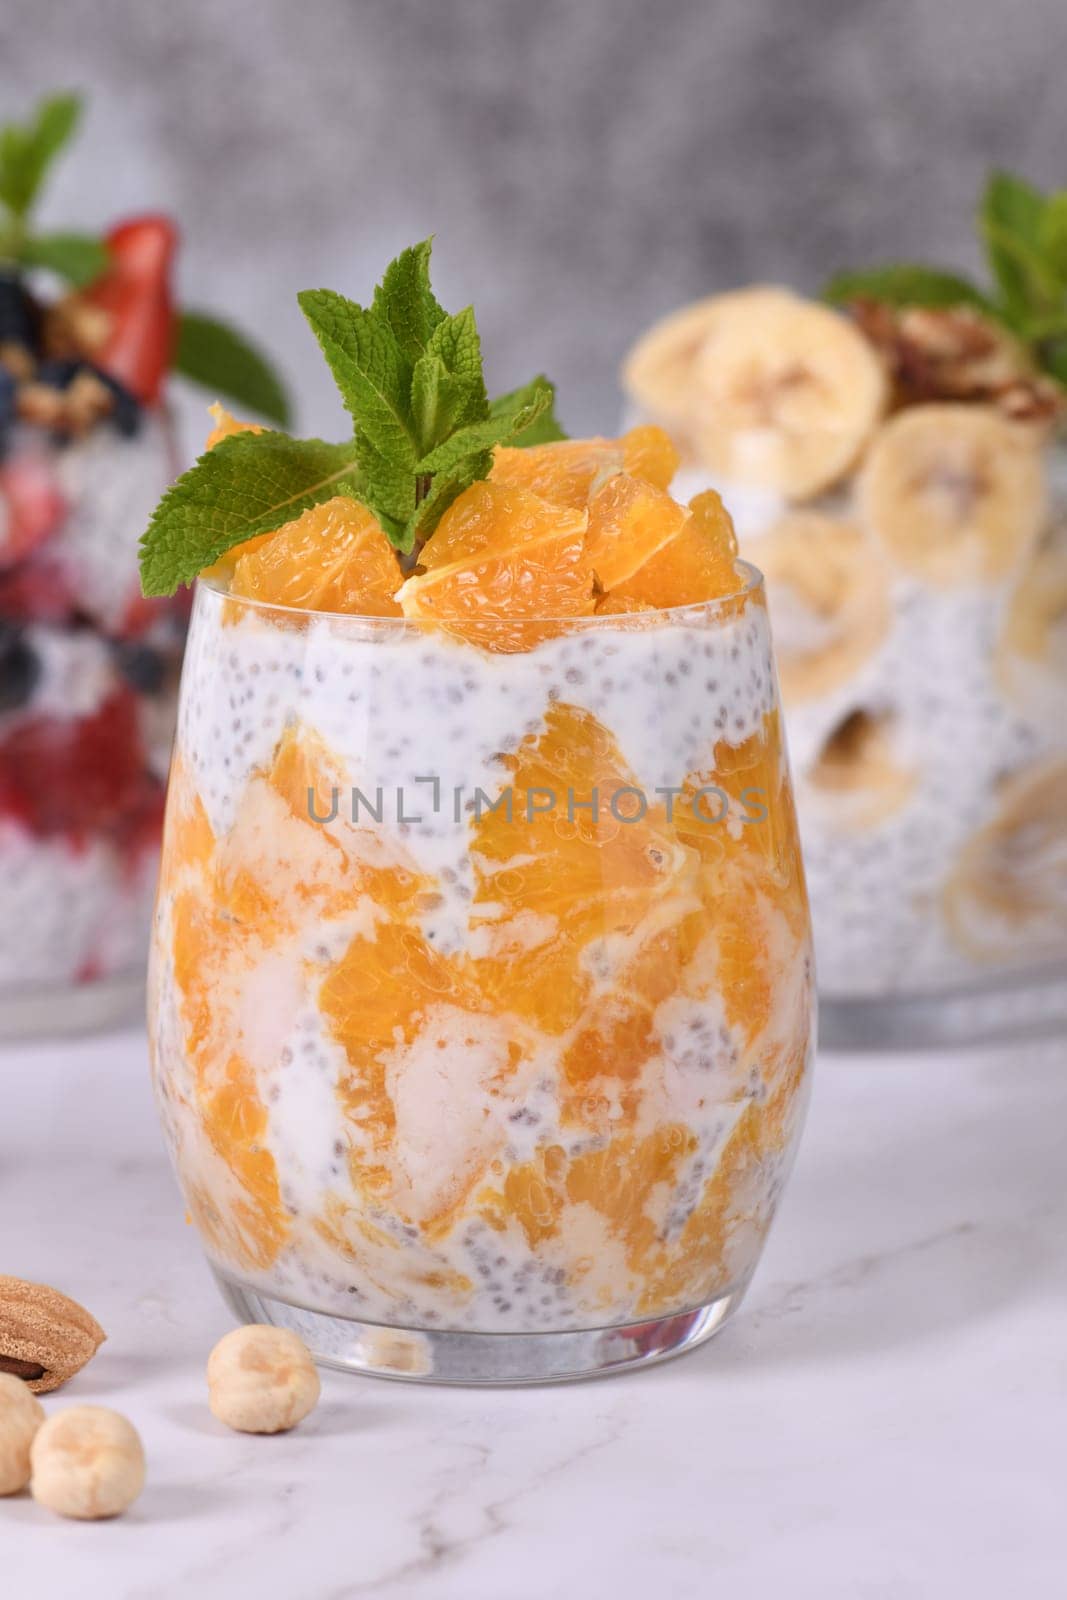 Chia dessert with Greek yogurt and orange slices. Absolutely helpful. Perfect breakfast or snack. Suitable for vegans and gluten free.